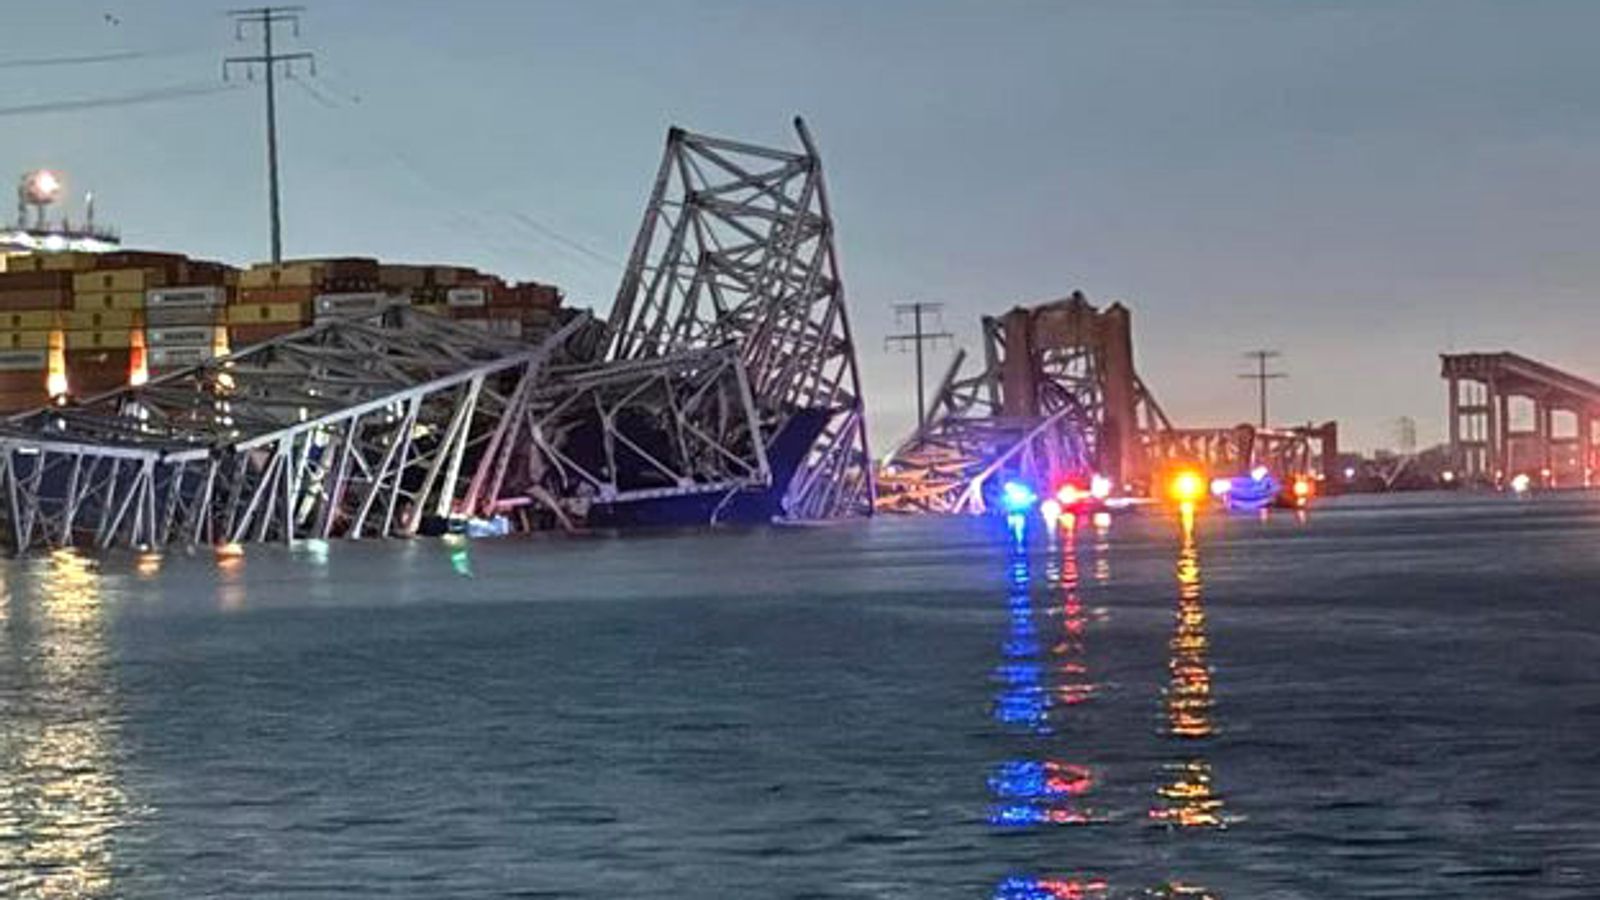 People and Vehicles Go Down Into River as Baltimore Bridge Collapses